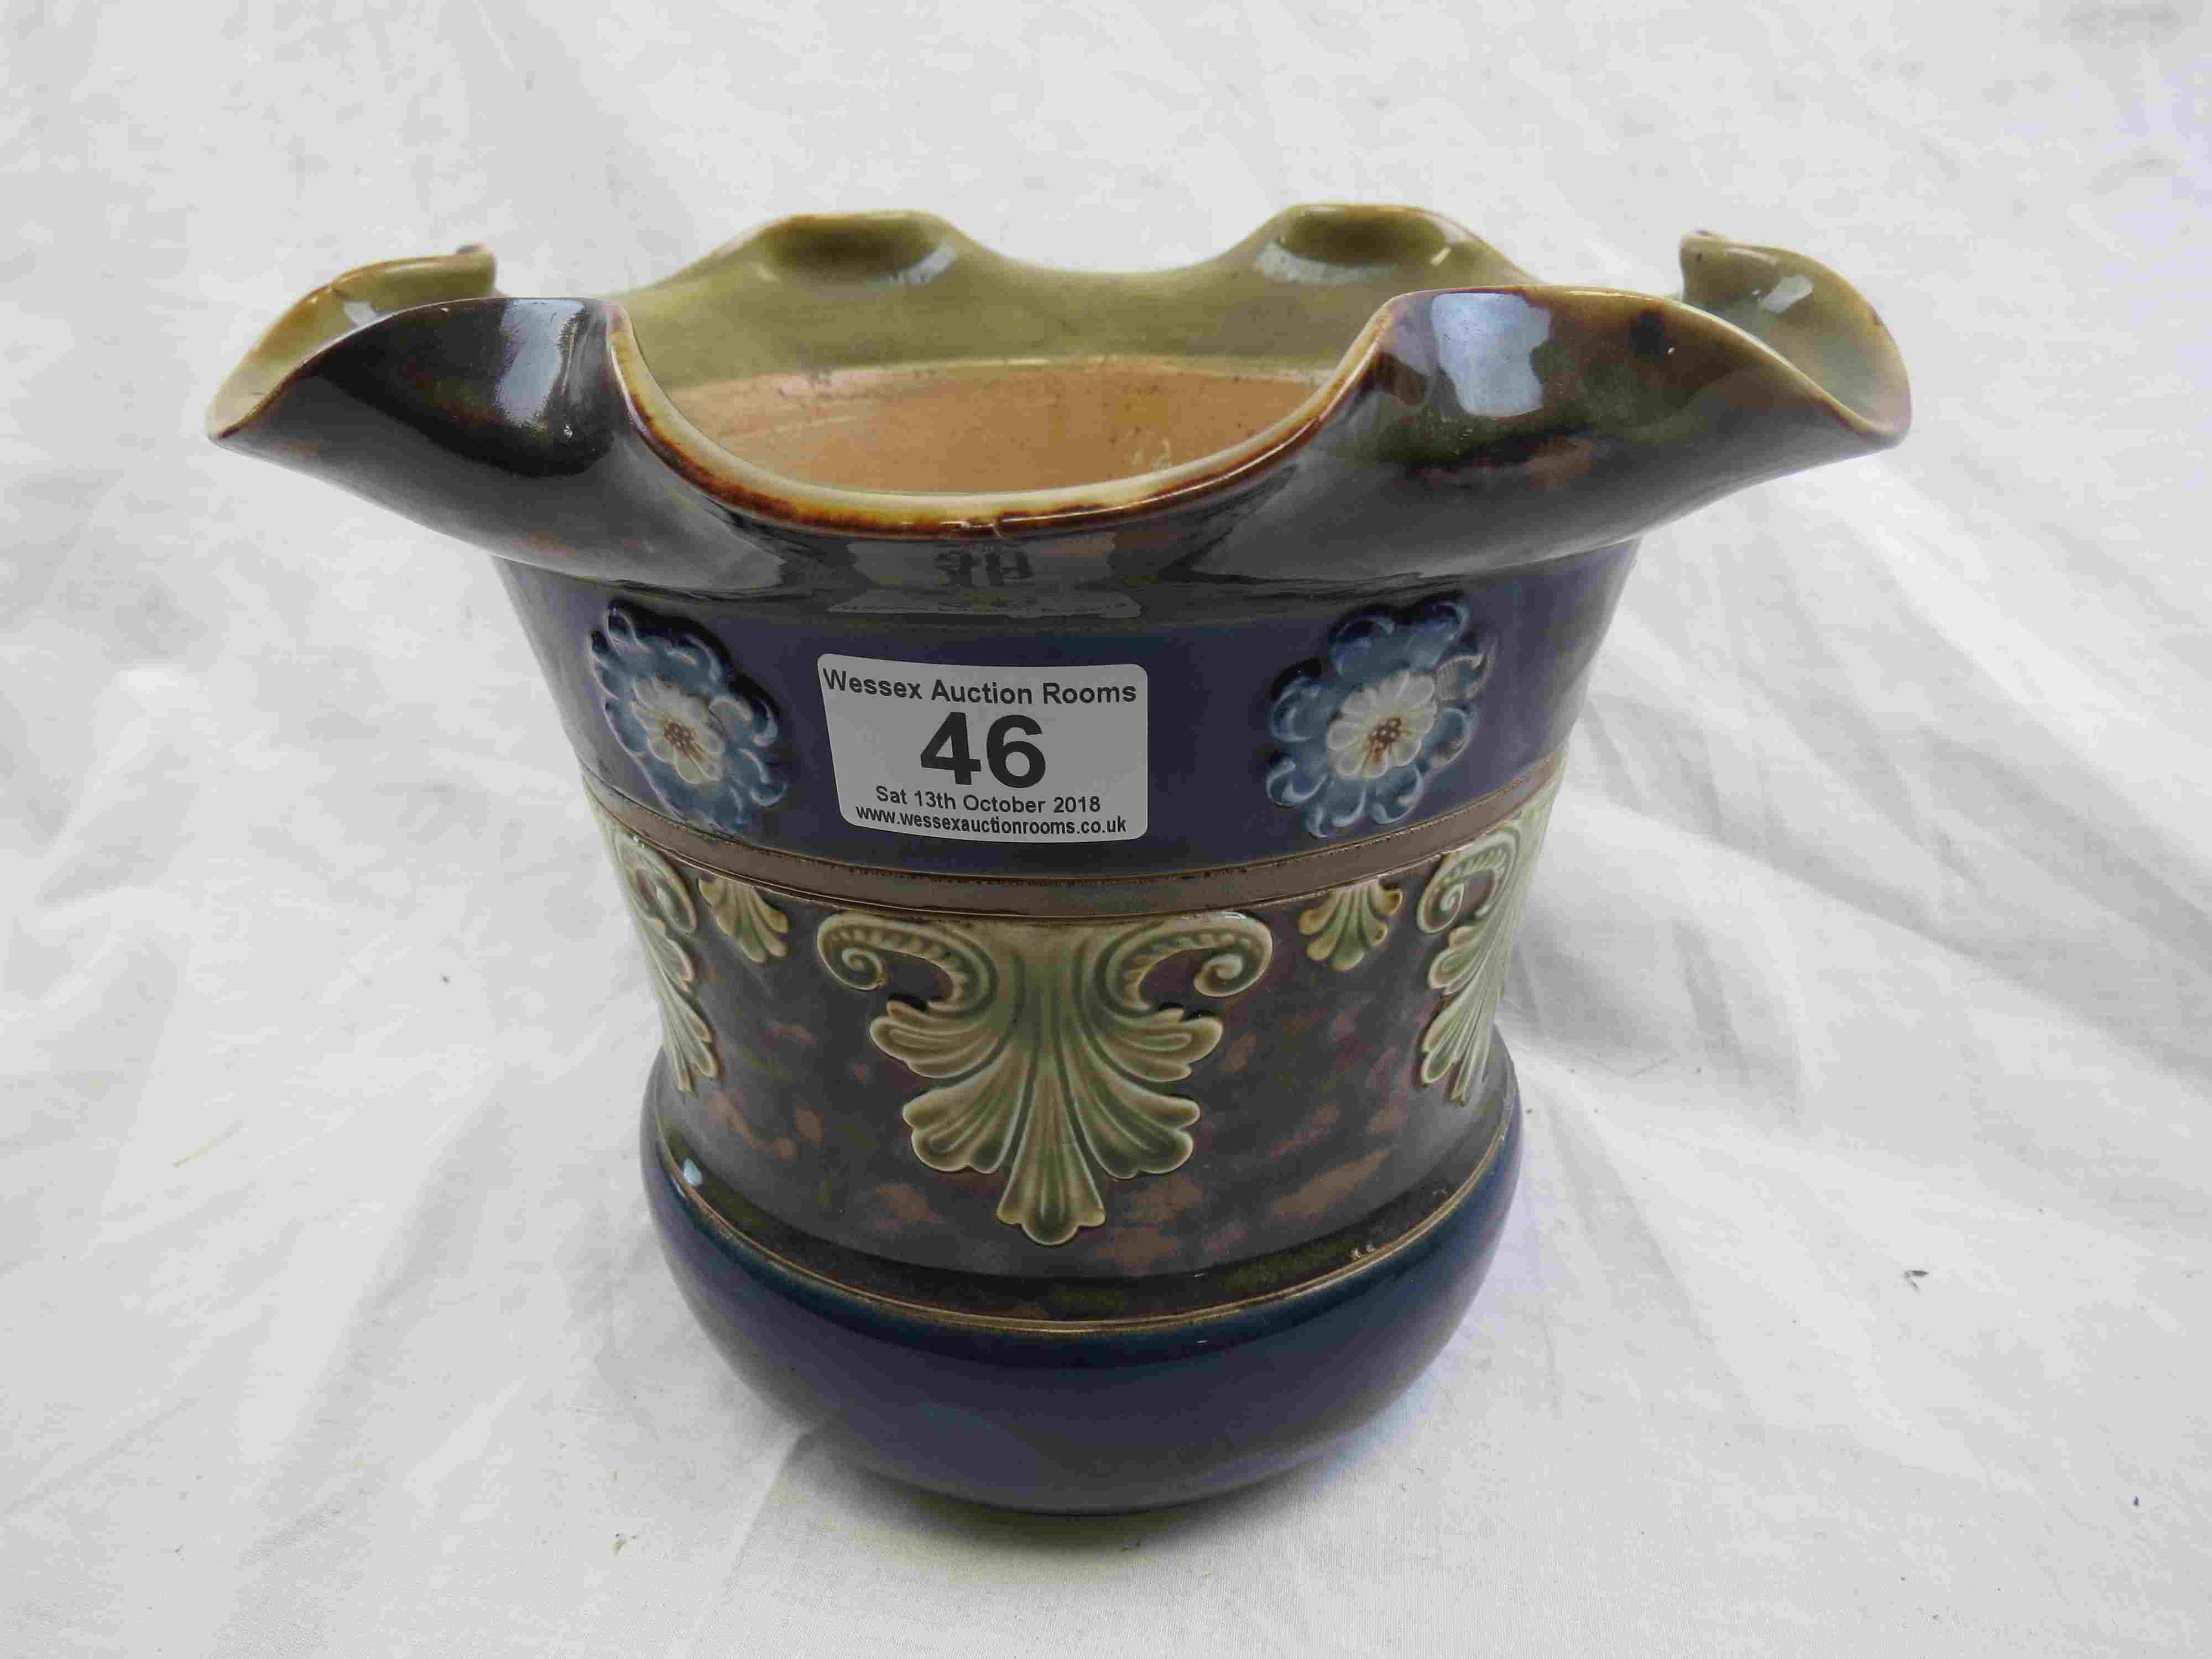 Royal Doulton jadiniere of squat cylindical form with wavy edge, floral and foliate decoration in